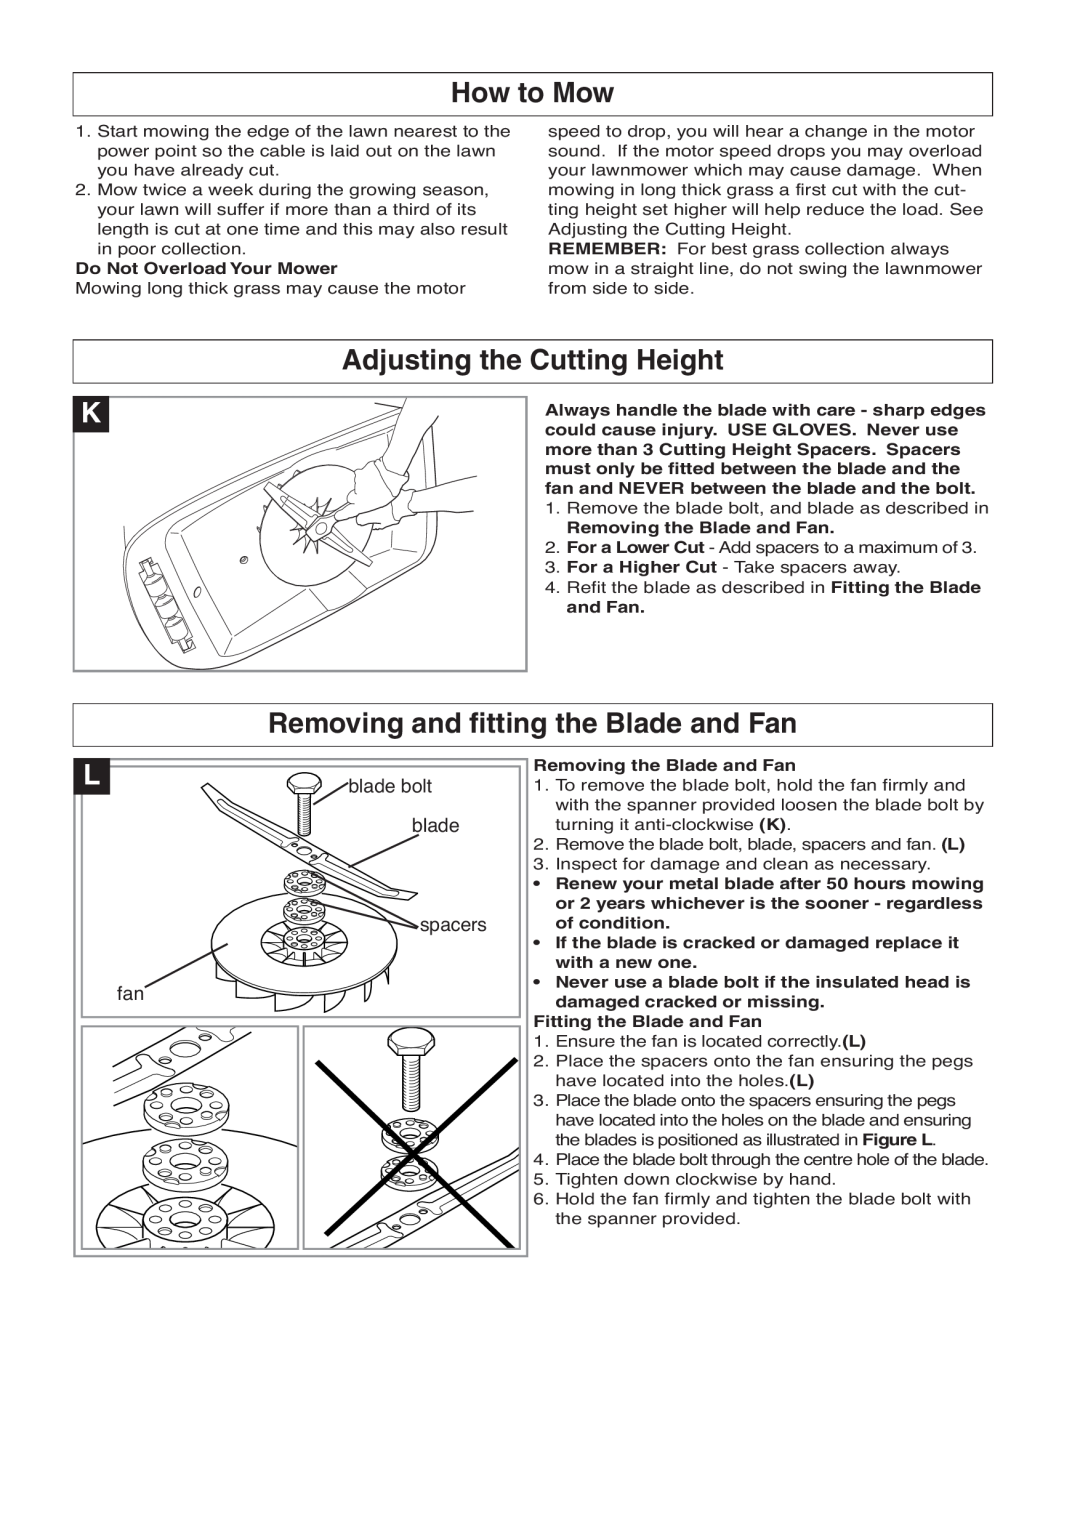 Flymo 350 How to Mow, Adjusting the Cutting Height, Removing and fitting the Blade and Fan, Do Not Overload Your Mower 